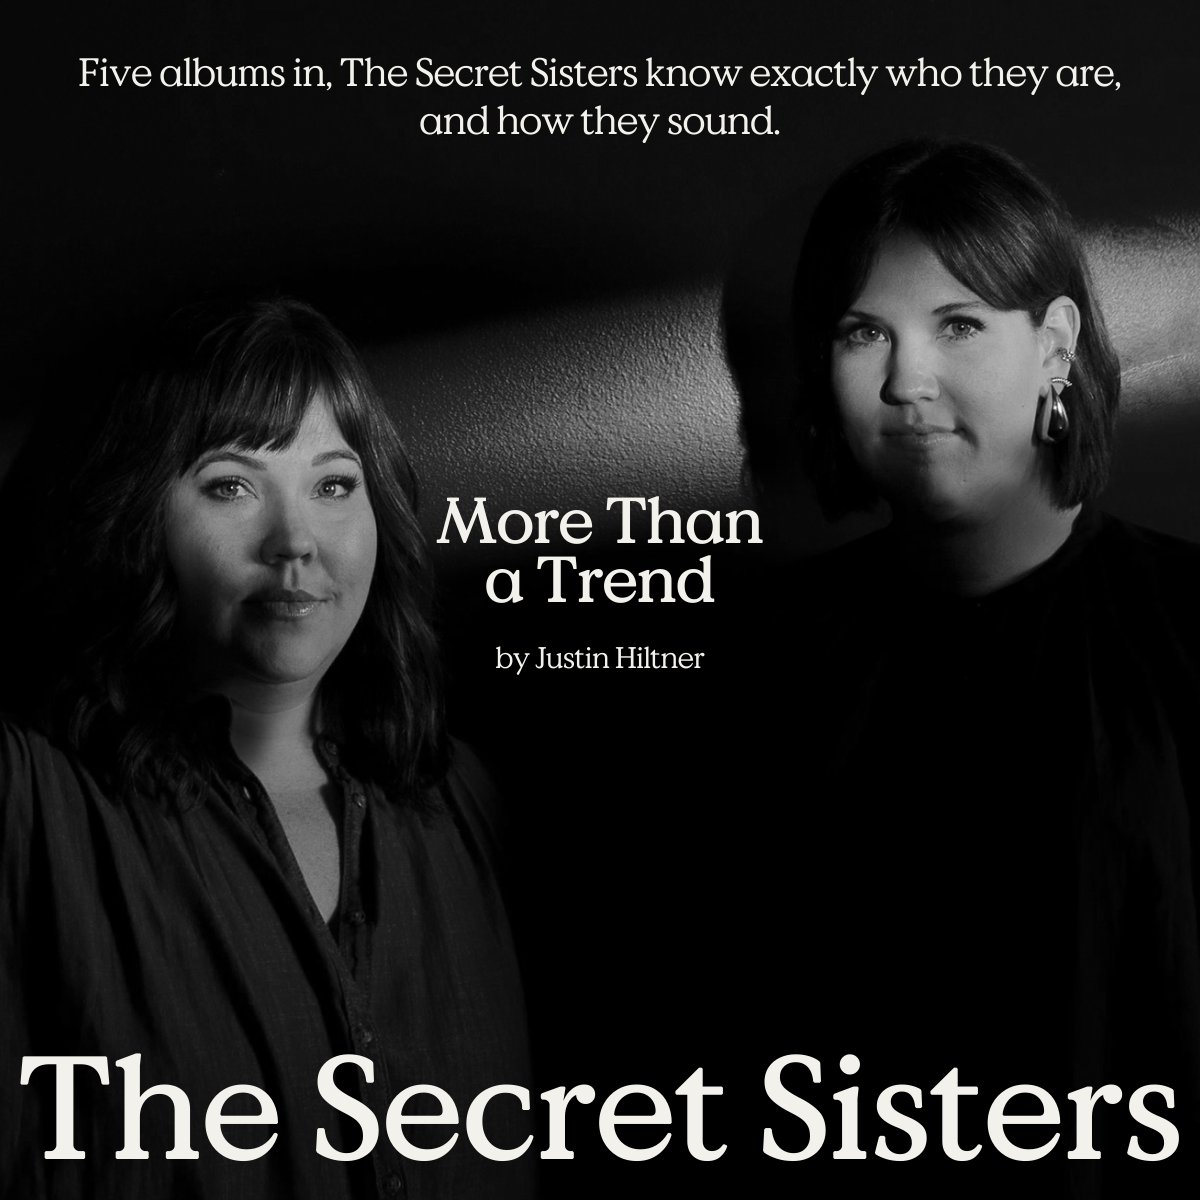 The rooted, folksy, familial, simple, and honest style @thesecretsister have cultivated over the course of their career in music is one of a kind – and, it's always been more than a trend. Read more on Good Country: bit.ly/3Wh6RZw